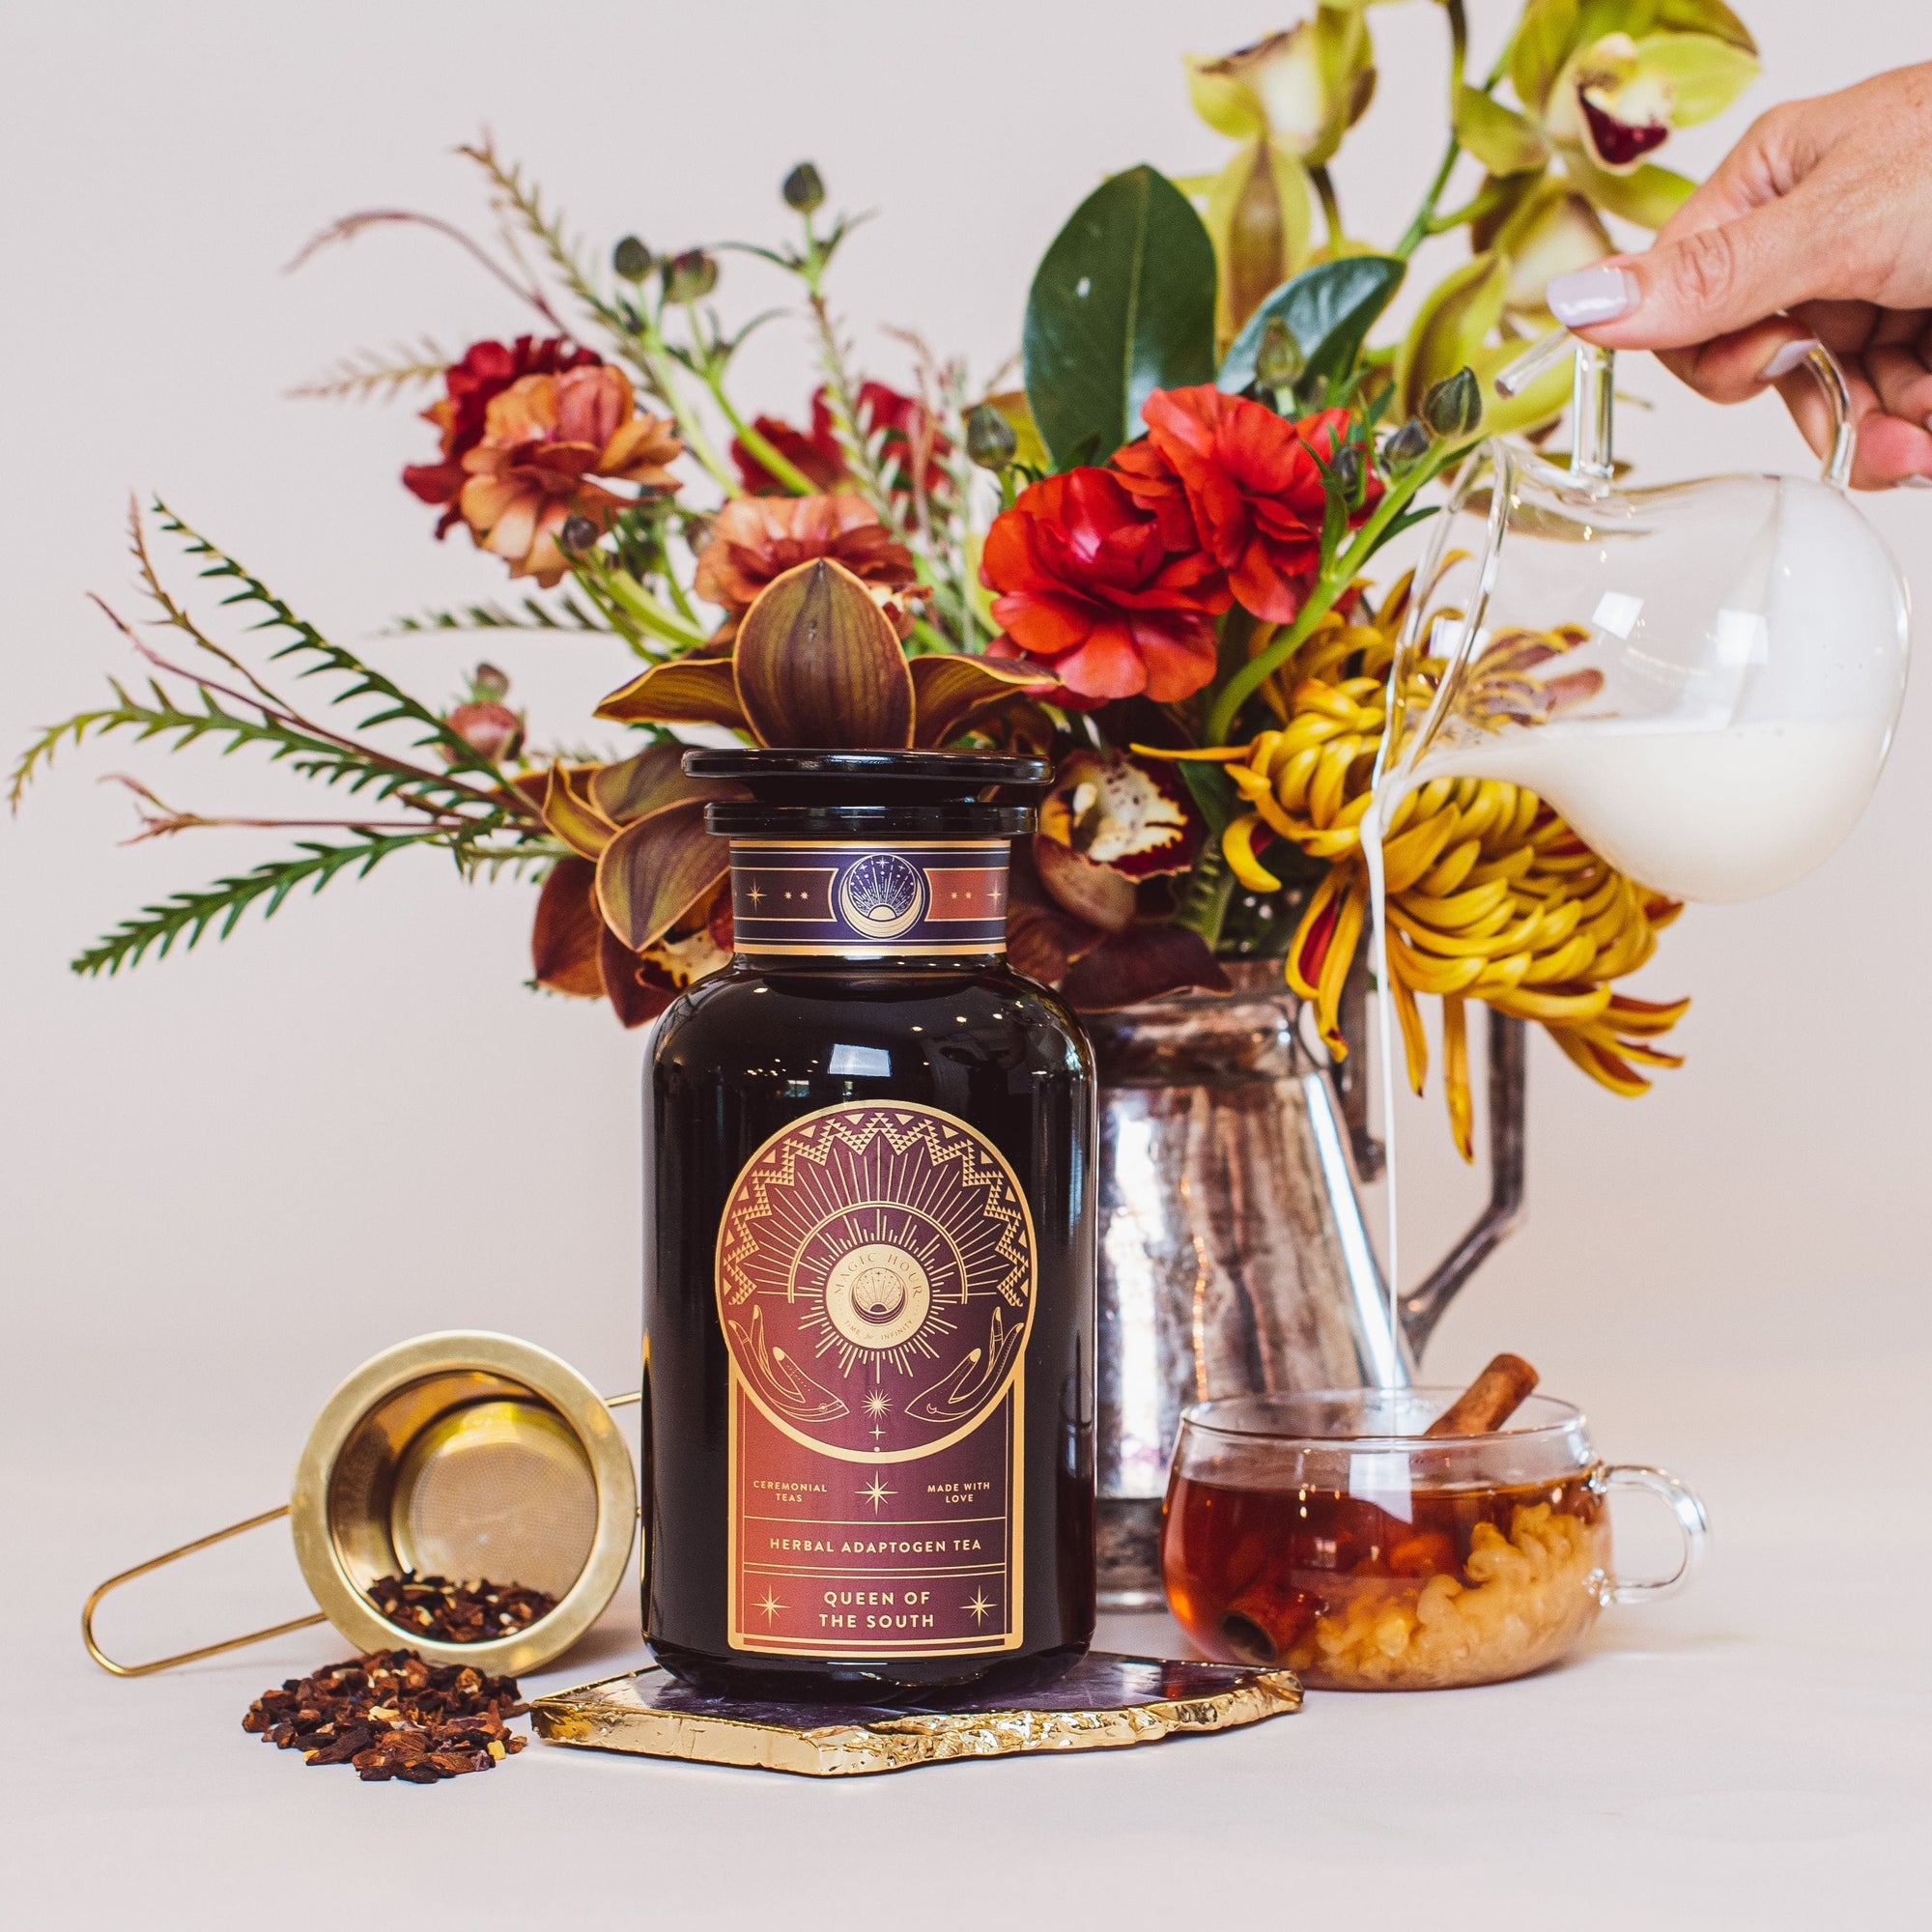 A display featuring a black and gold jar of "Queen of the South: Delicious Cocoa Detox Tea" by Magic Hour, a golden tea strainer with loose tea leaves, a mug of organic tea with cinnamon, a metal pitcher of milk being poured, and a vibrant floral arrangement in the background.